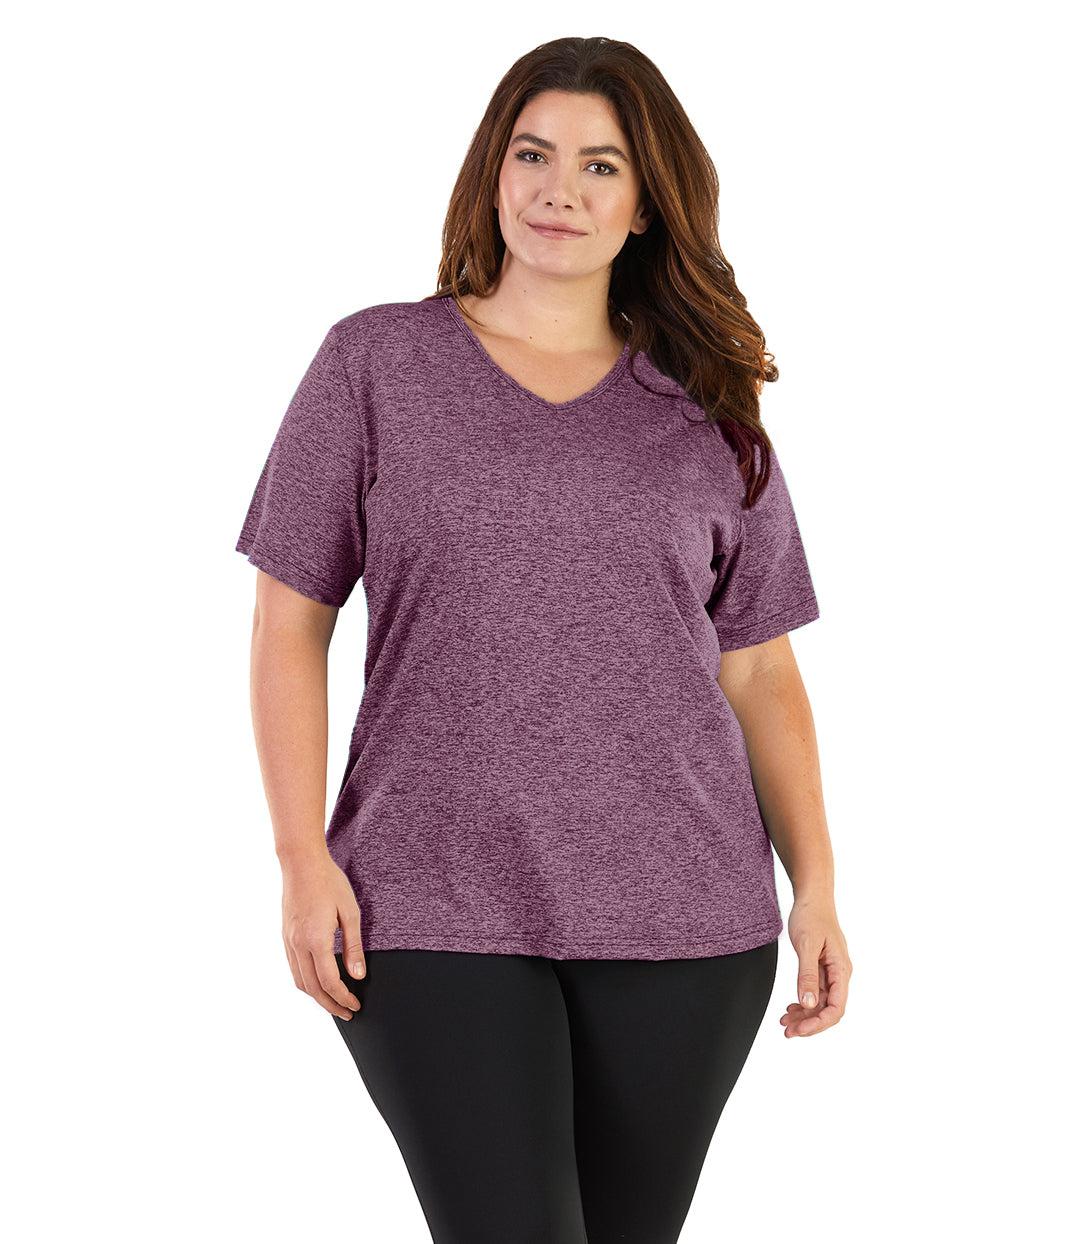 Plus size woman, facing front, wearing JunoActive plus size SoftWik V-Neck Tee in the color Heather Merlot. She is wearing JunoActive Plus Size Leggings in the color Black